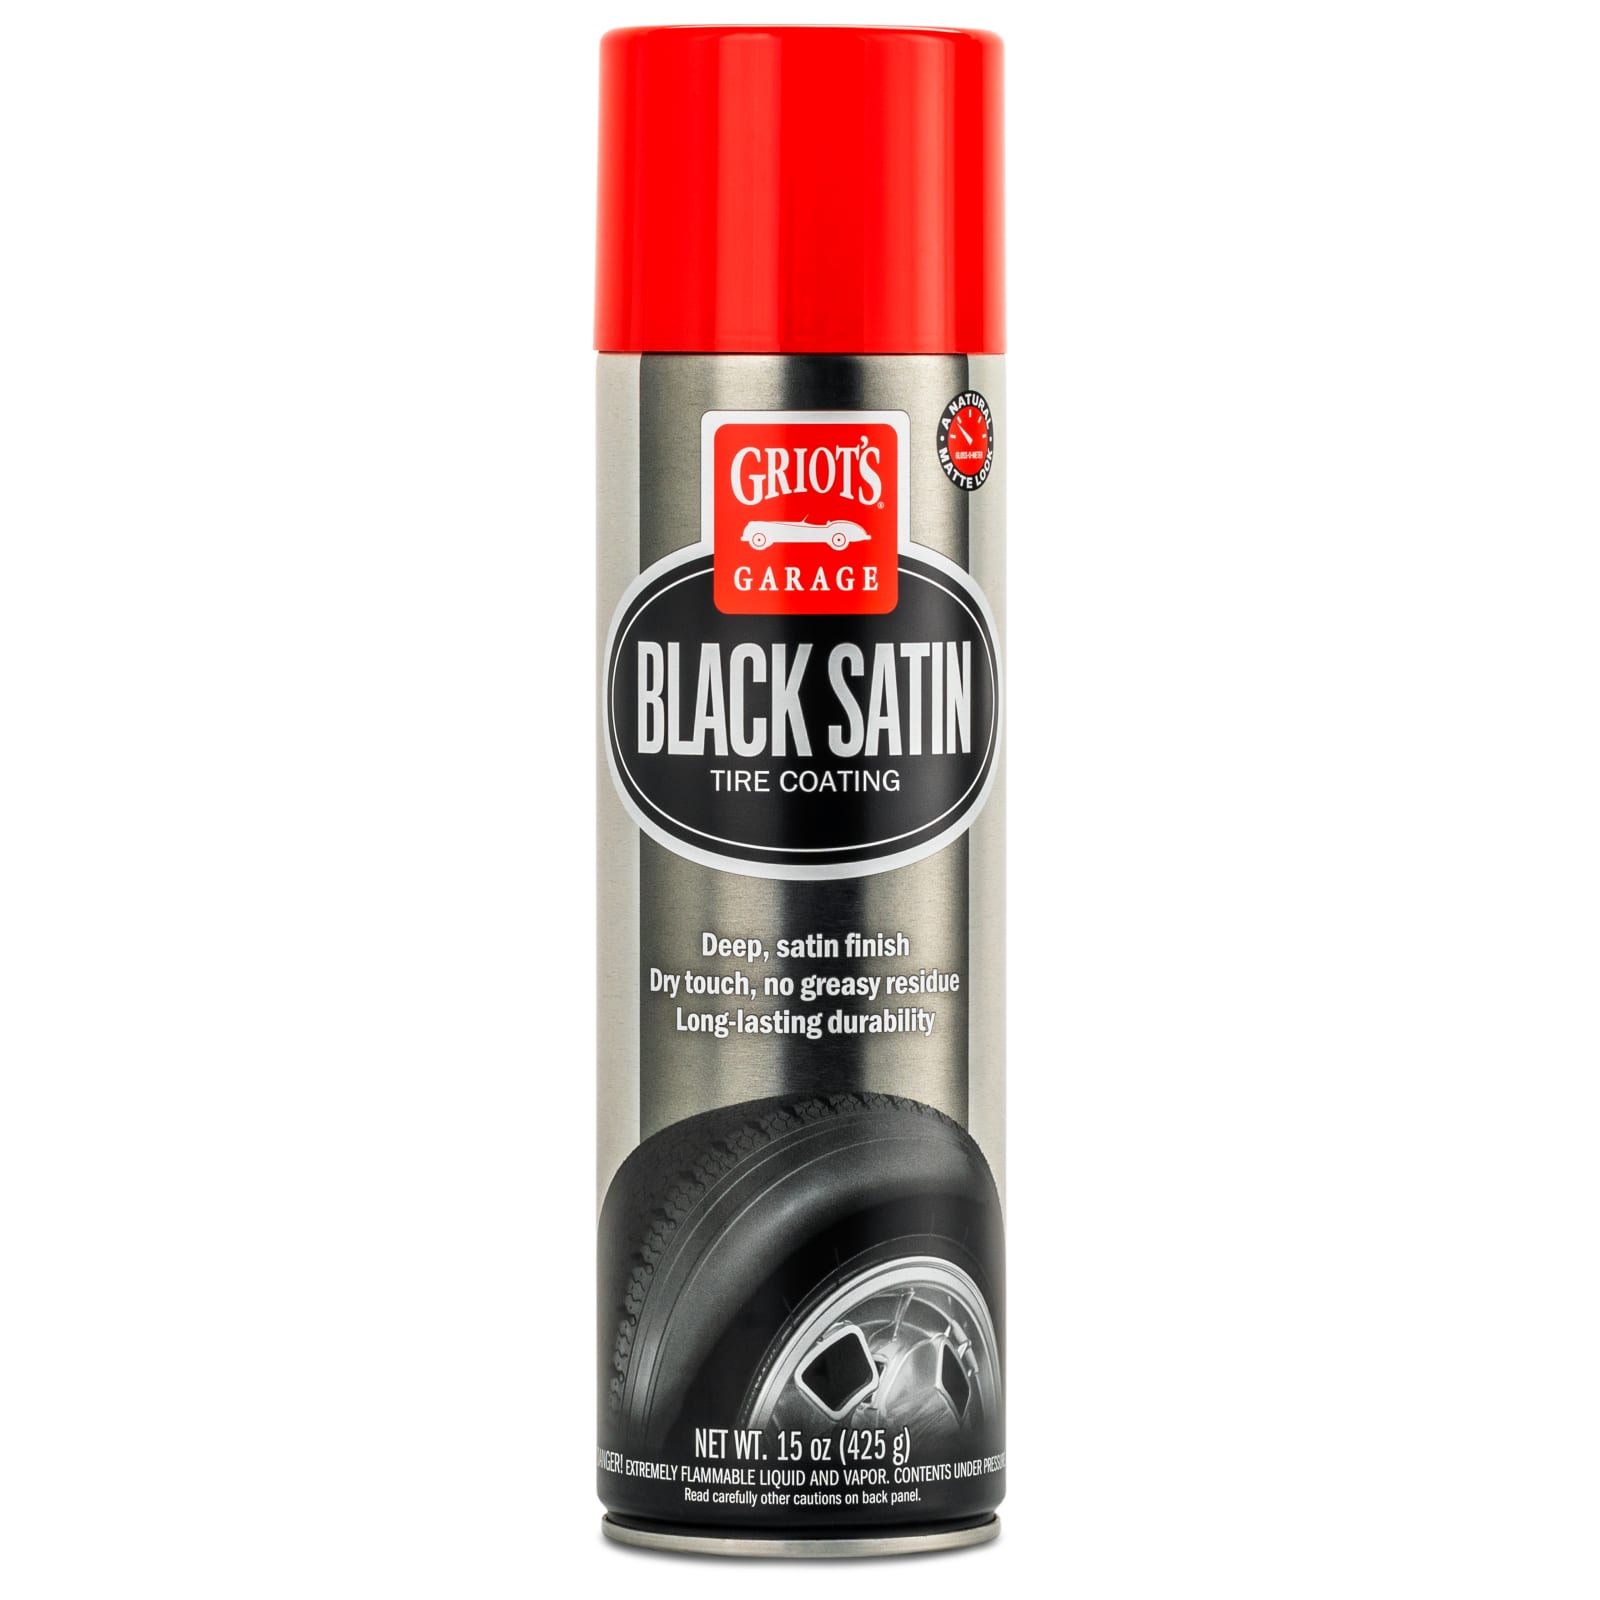 Tire Black King - TRY OUR TIRE GLOSS Rain or shine” ,all